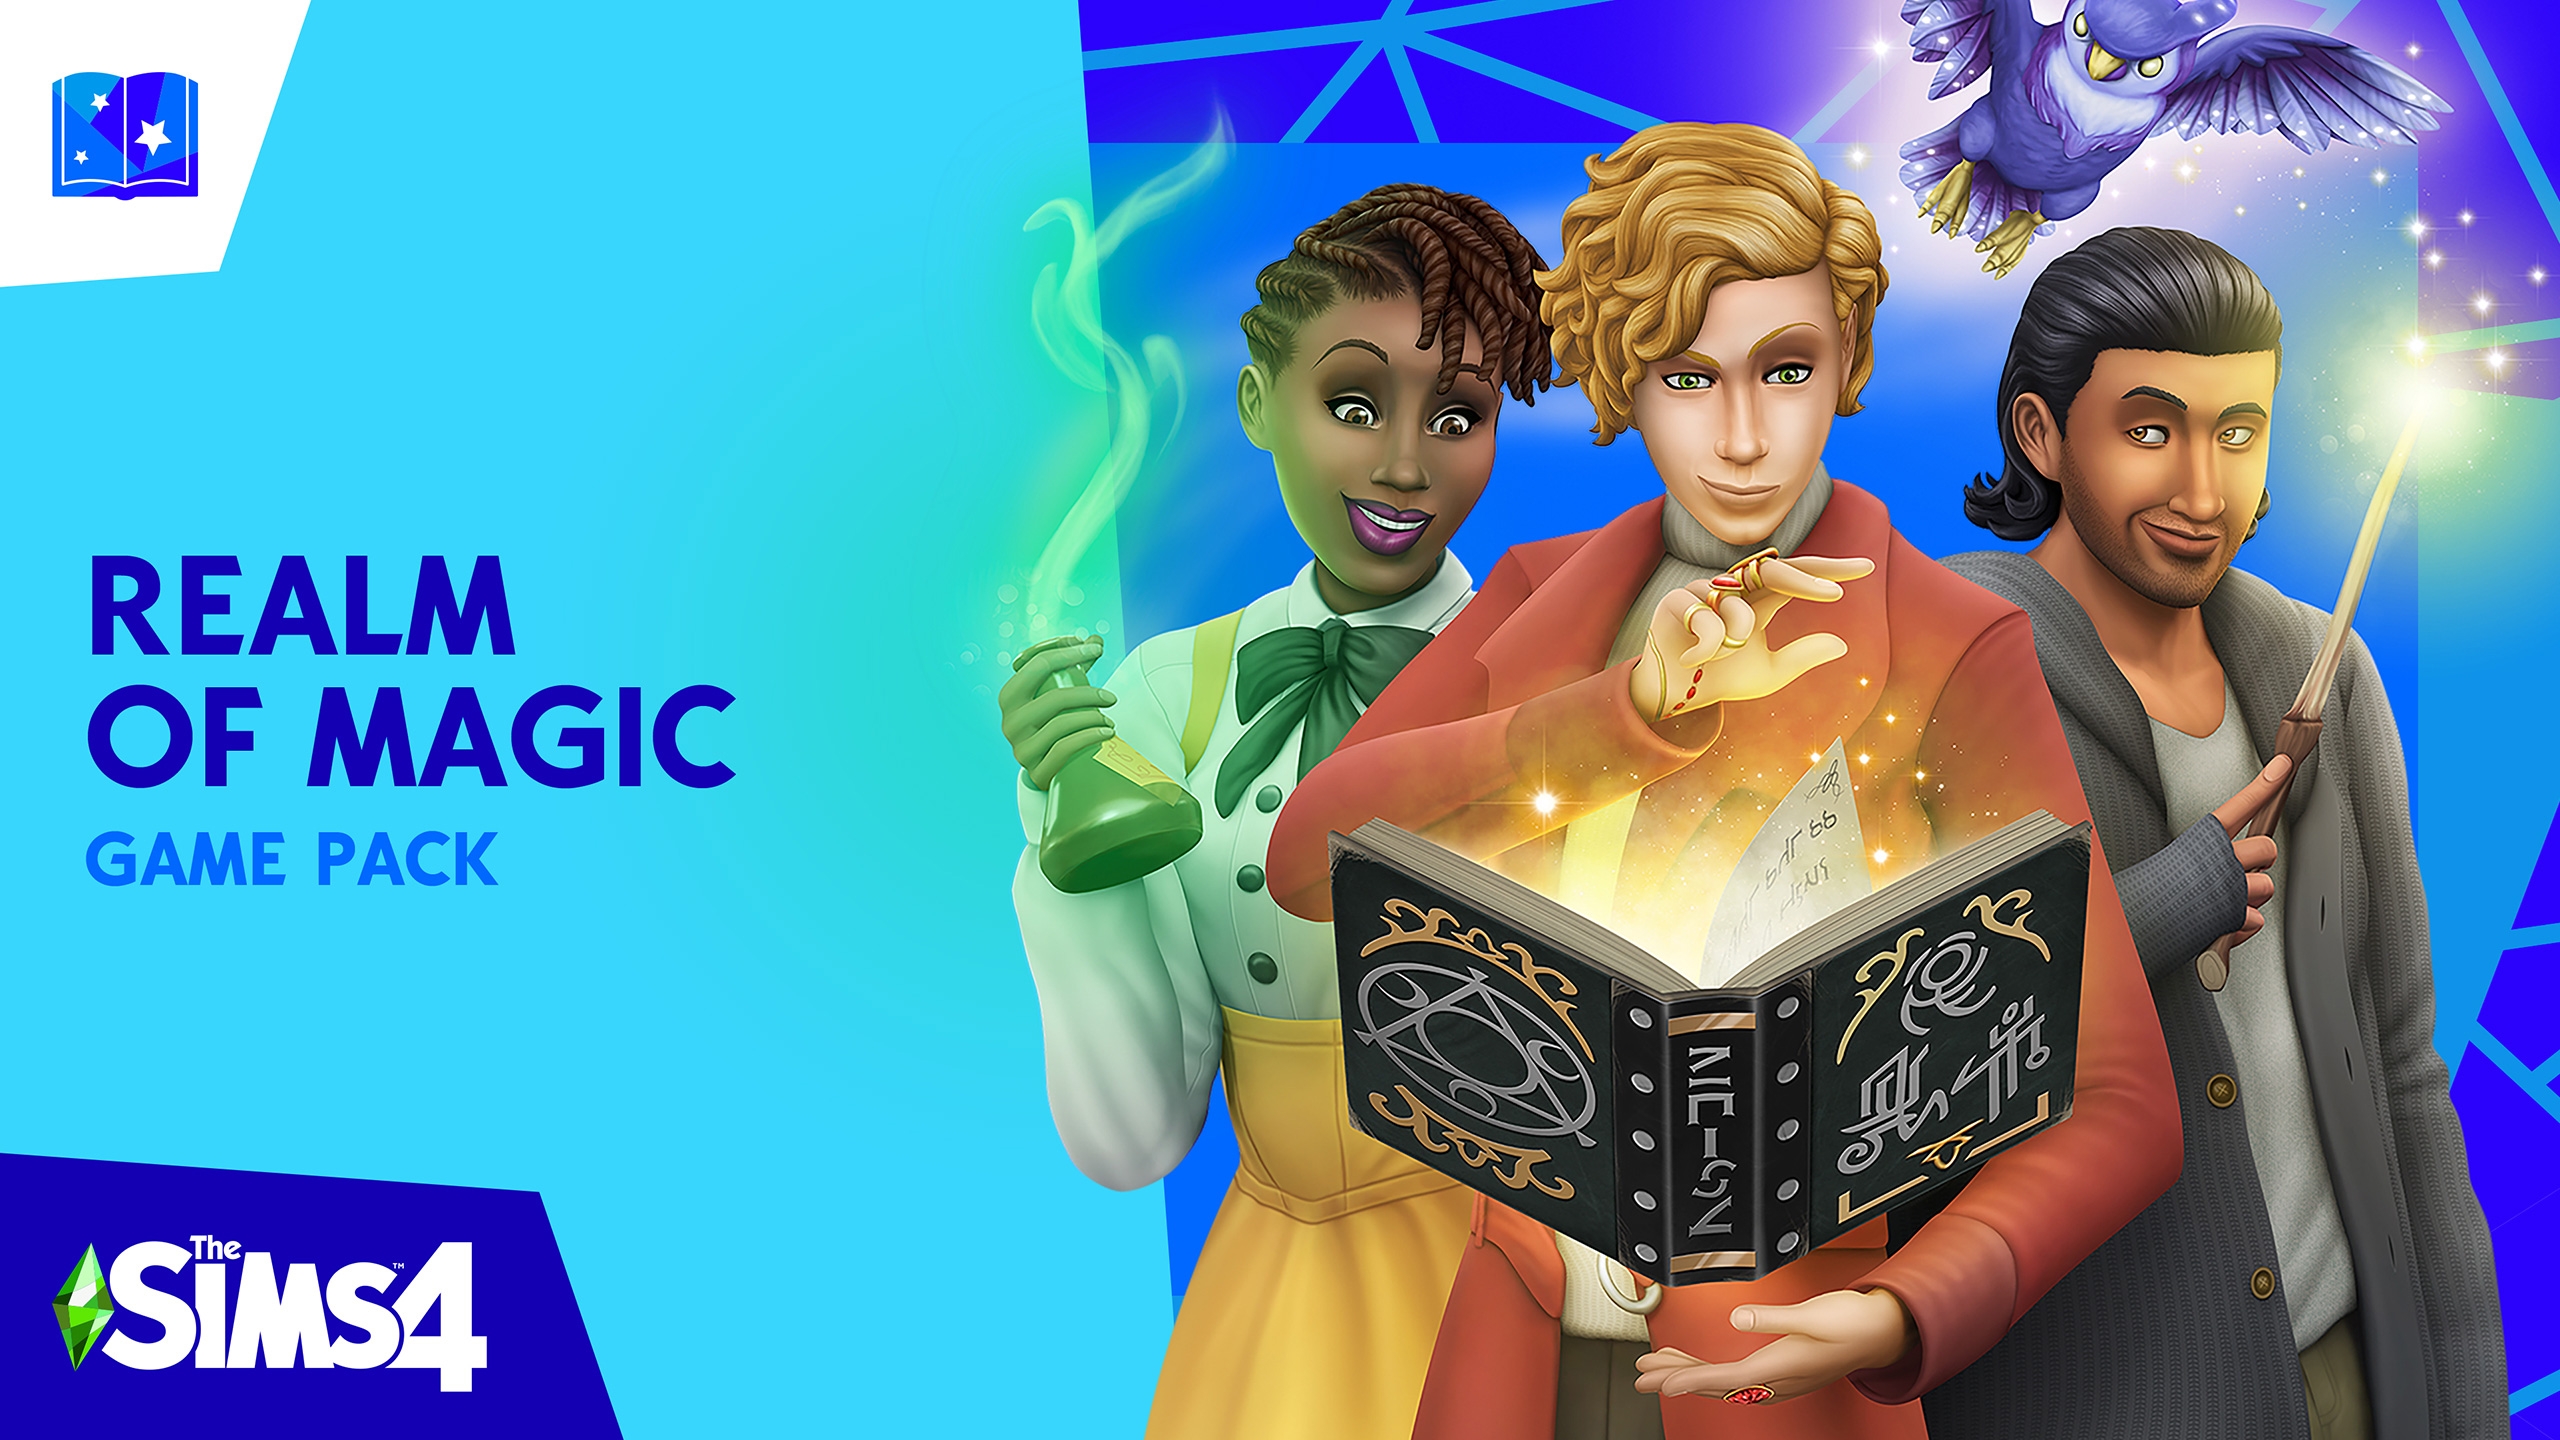 Re: FAQ - The Sims 4 Discover University release on PC/Mac - Answer HQ